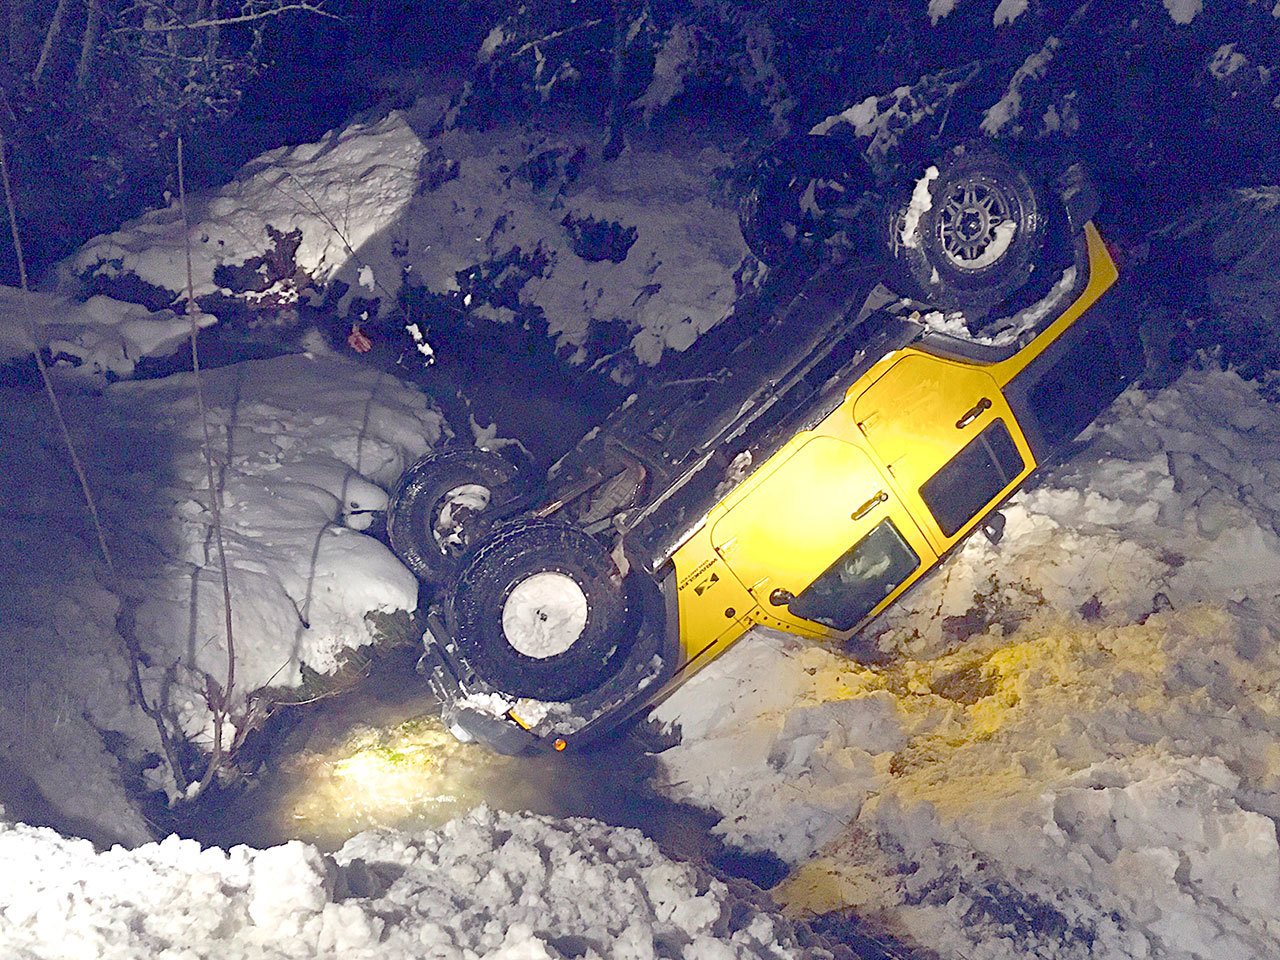 A Jeep Wrangler slid off Black Diamond Road late Friday afternoon. No one was hurt, fire department officials said. (Clallam County Fire District No. 2)